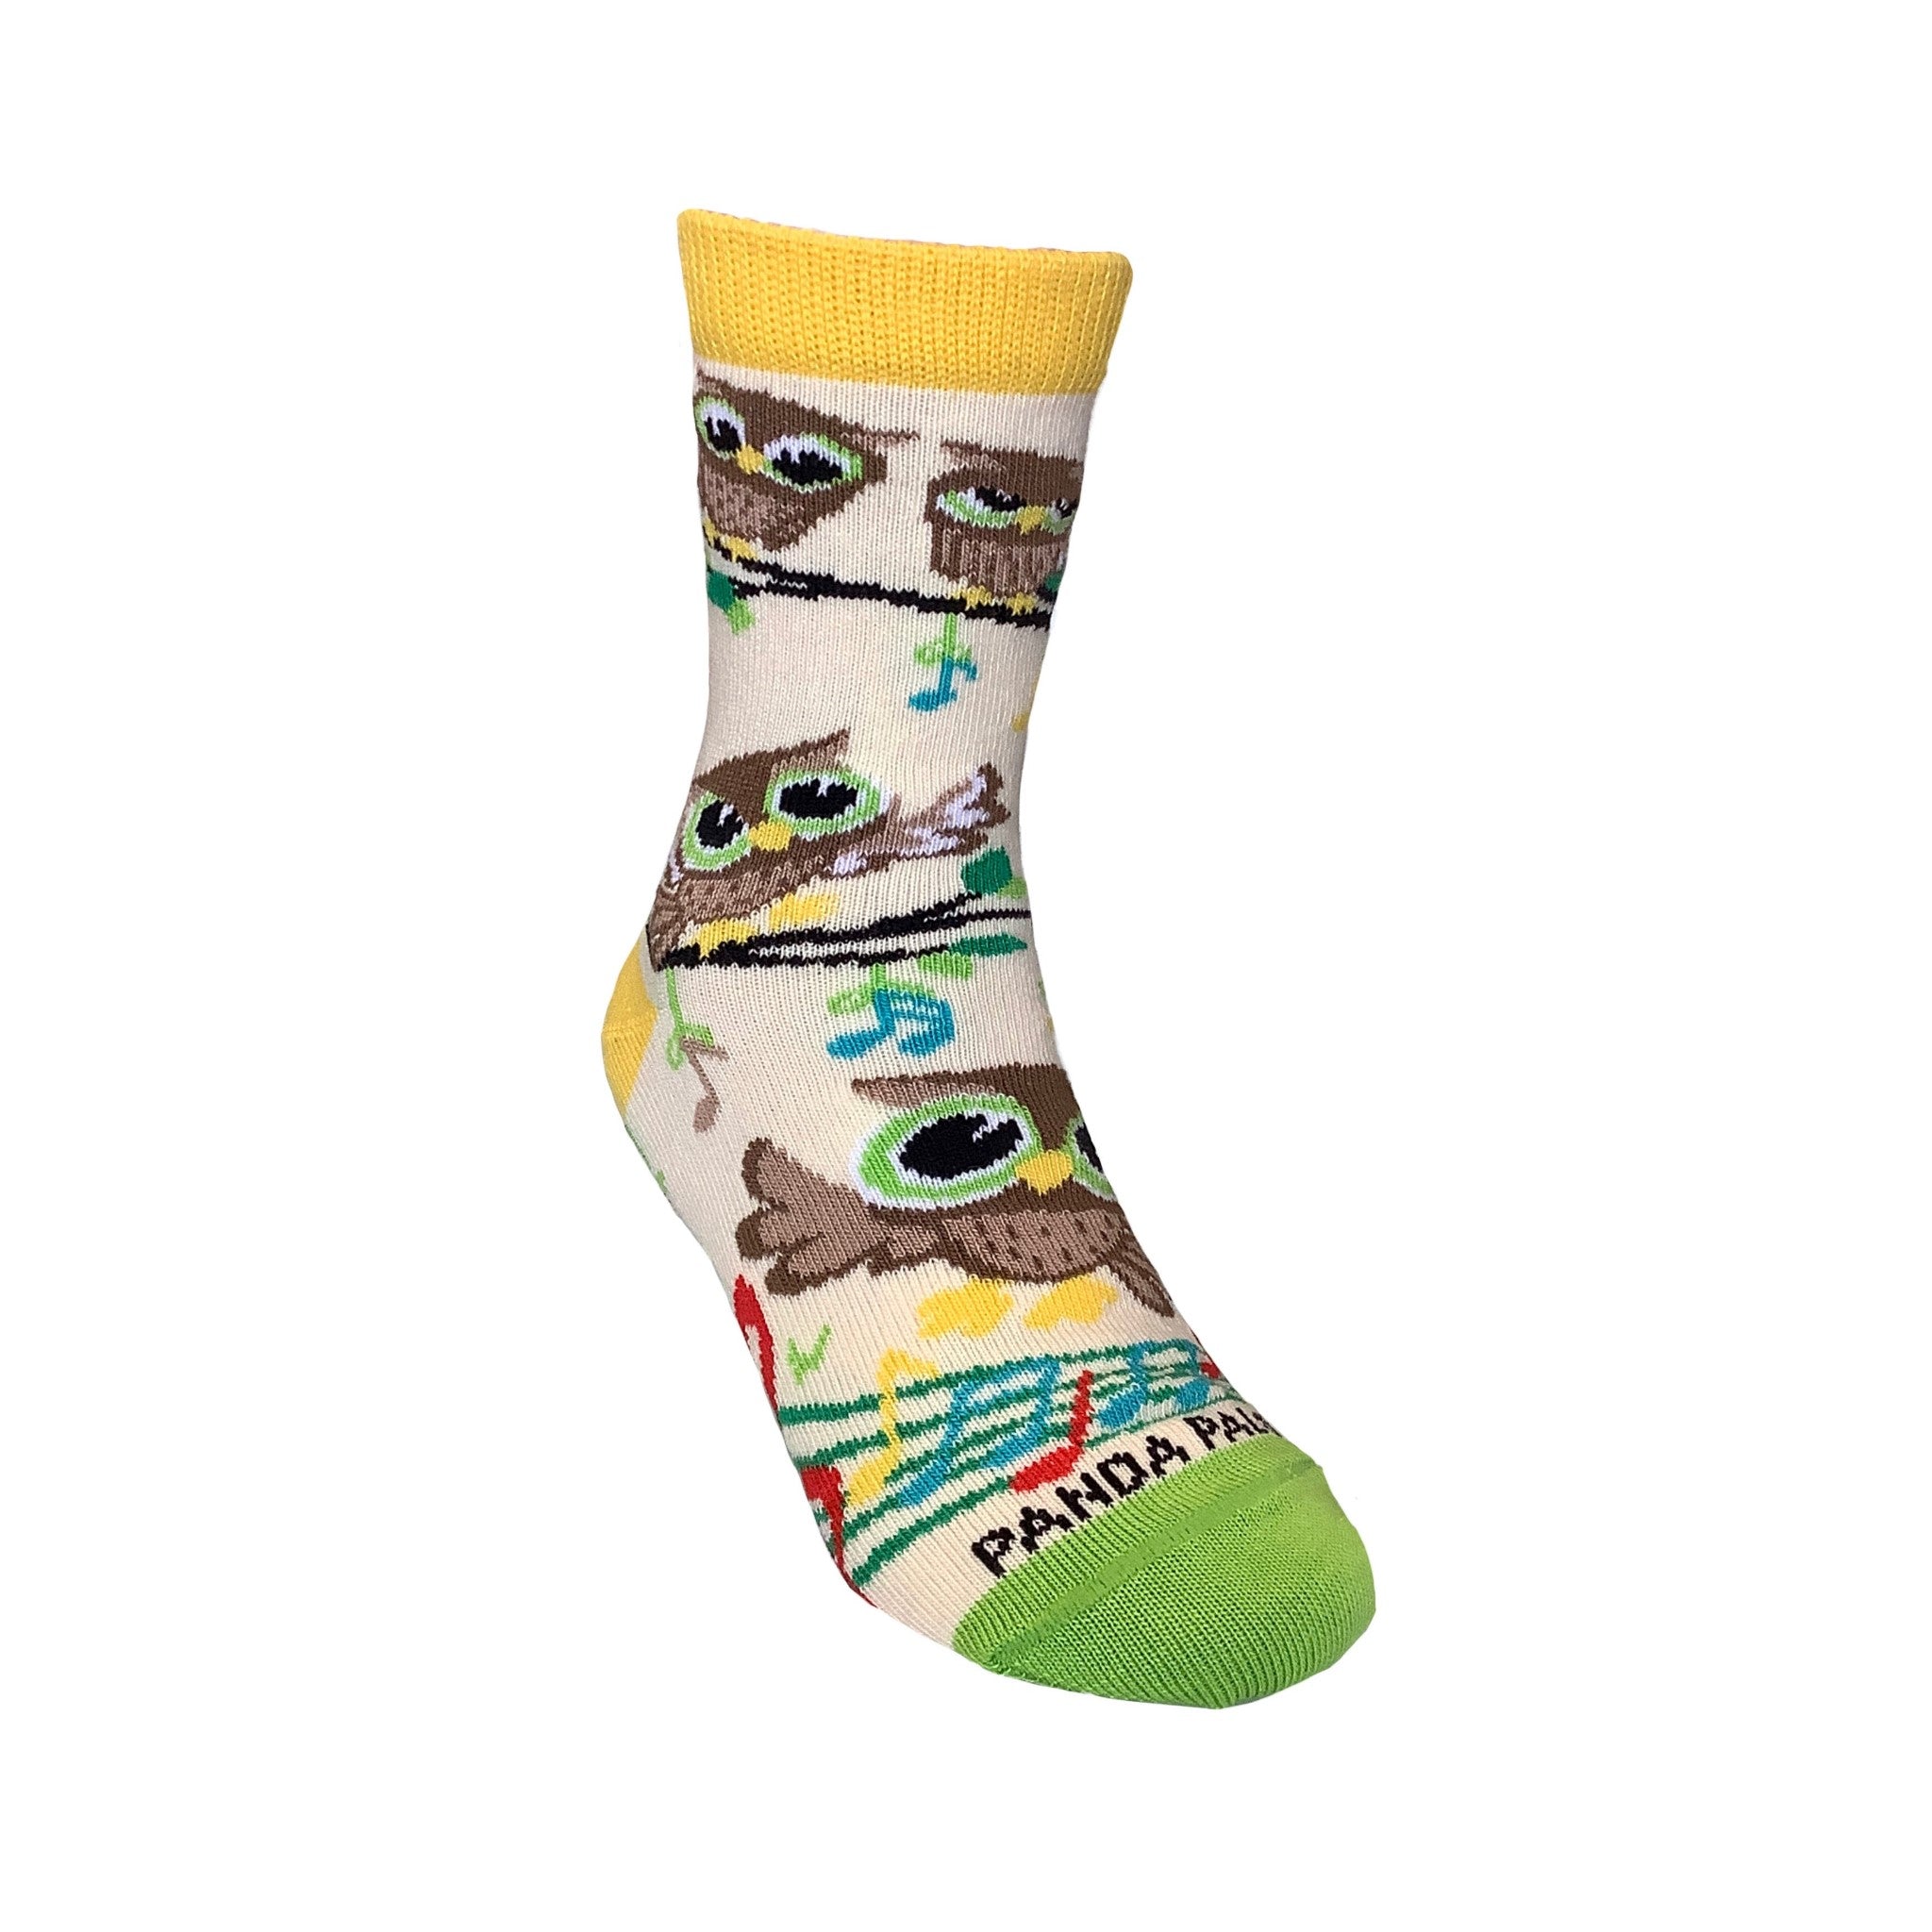 Owls Chorus Music Notes Socks (Ages 3-7) from the Sock Panda